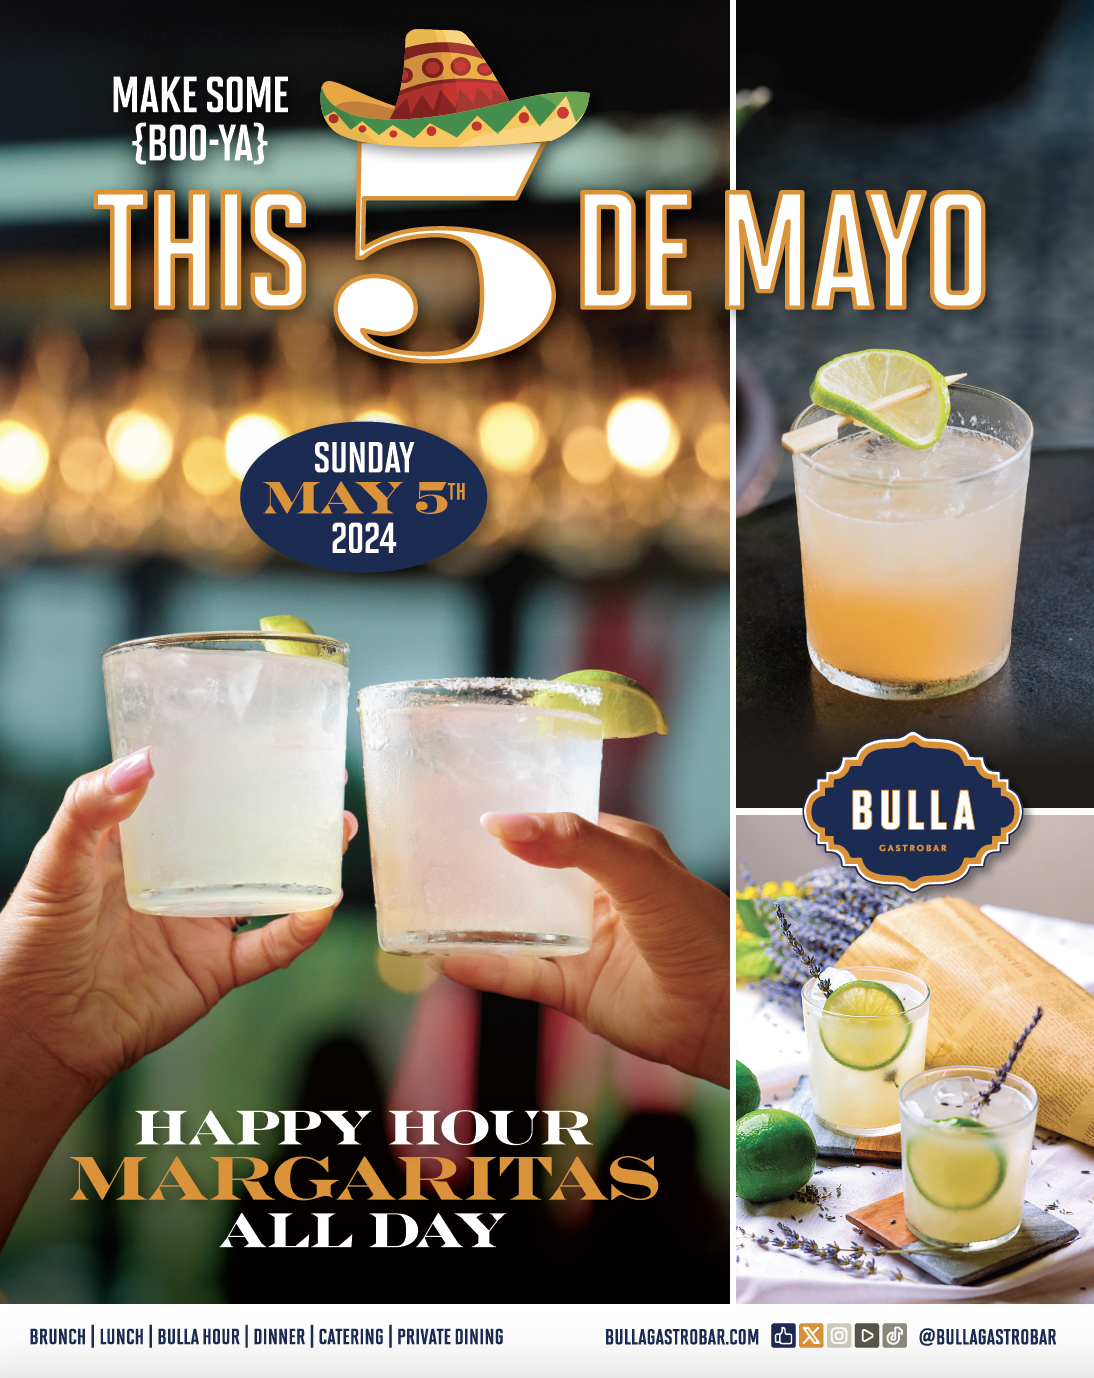 Celebrate Cinco de Mayo with an all day Happy Hour at Bulla Gastorbar 5